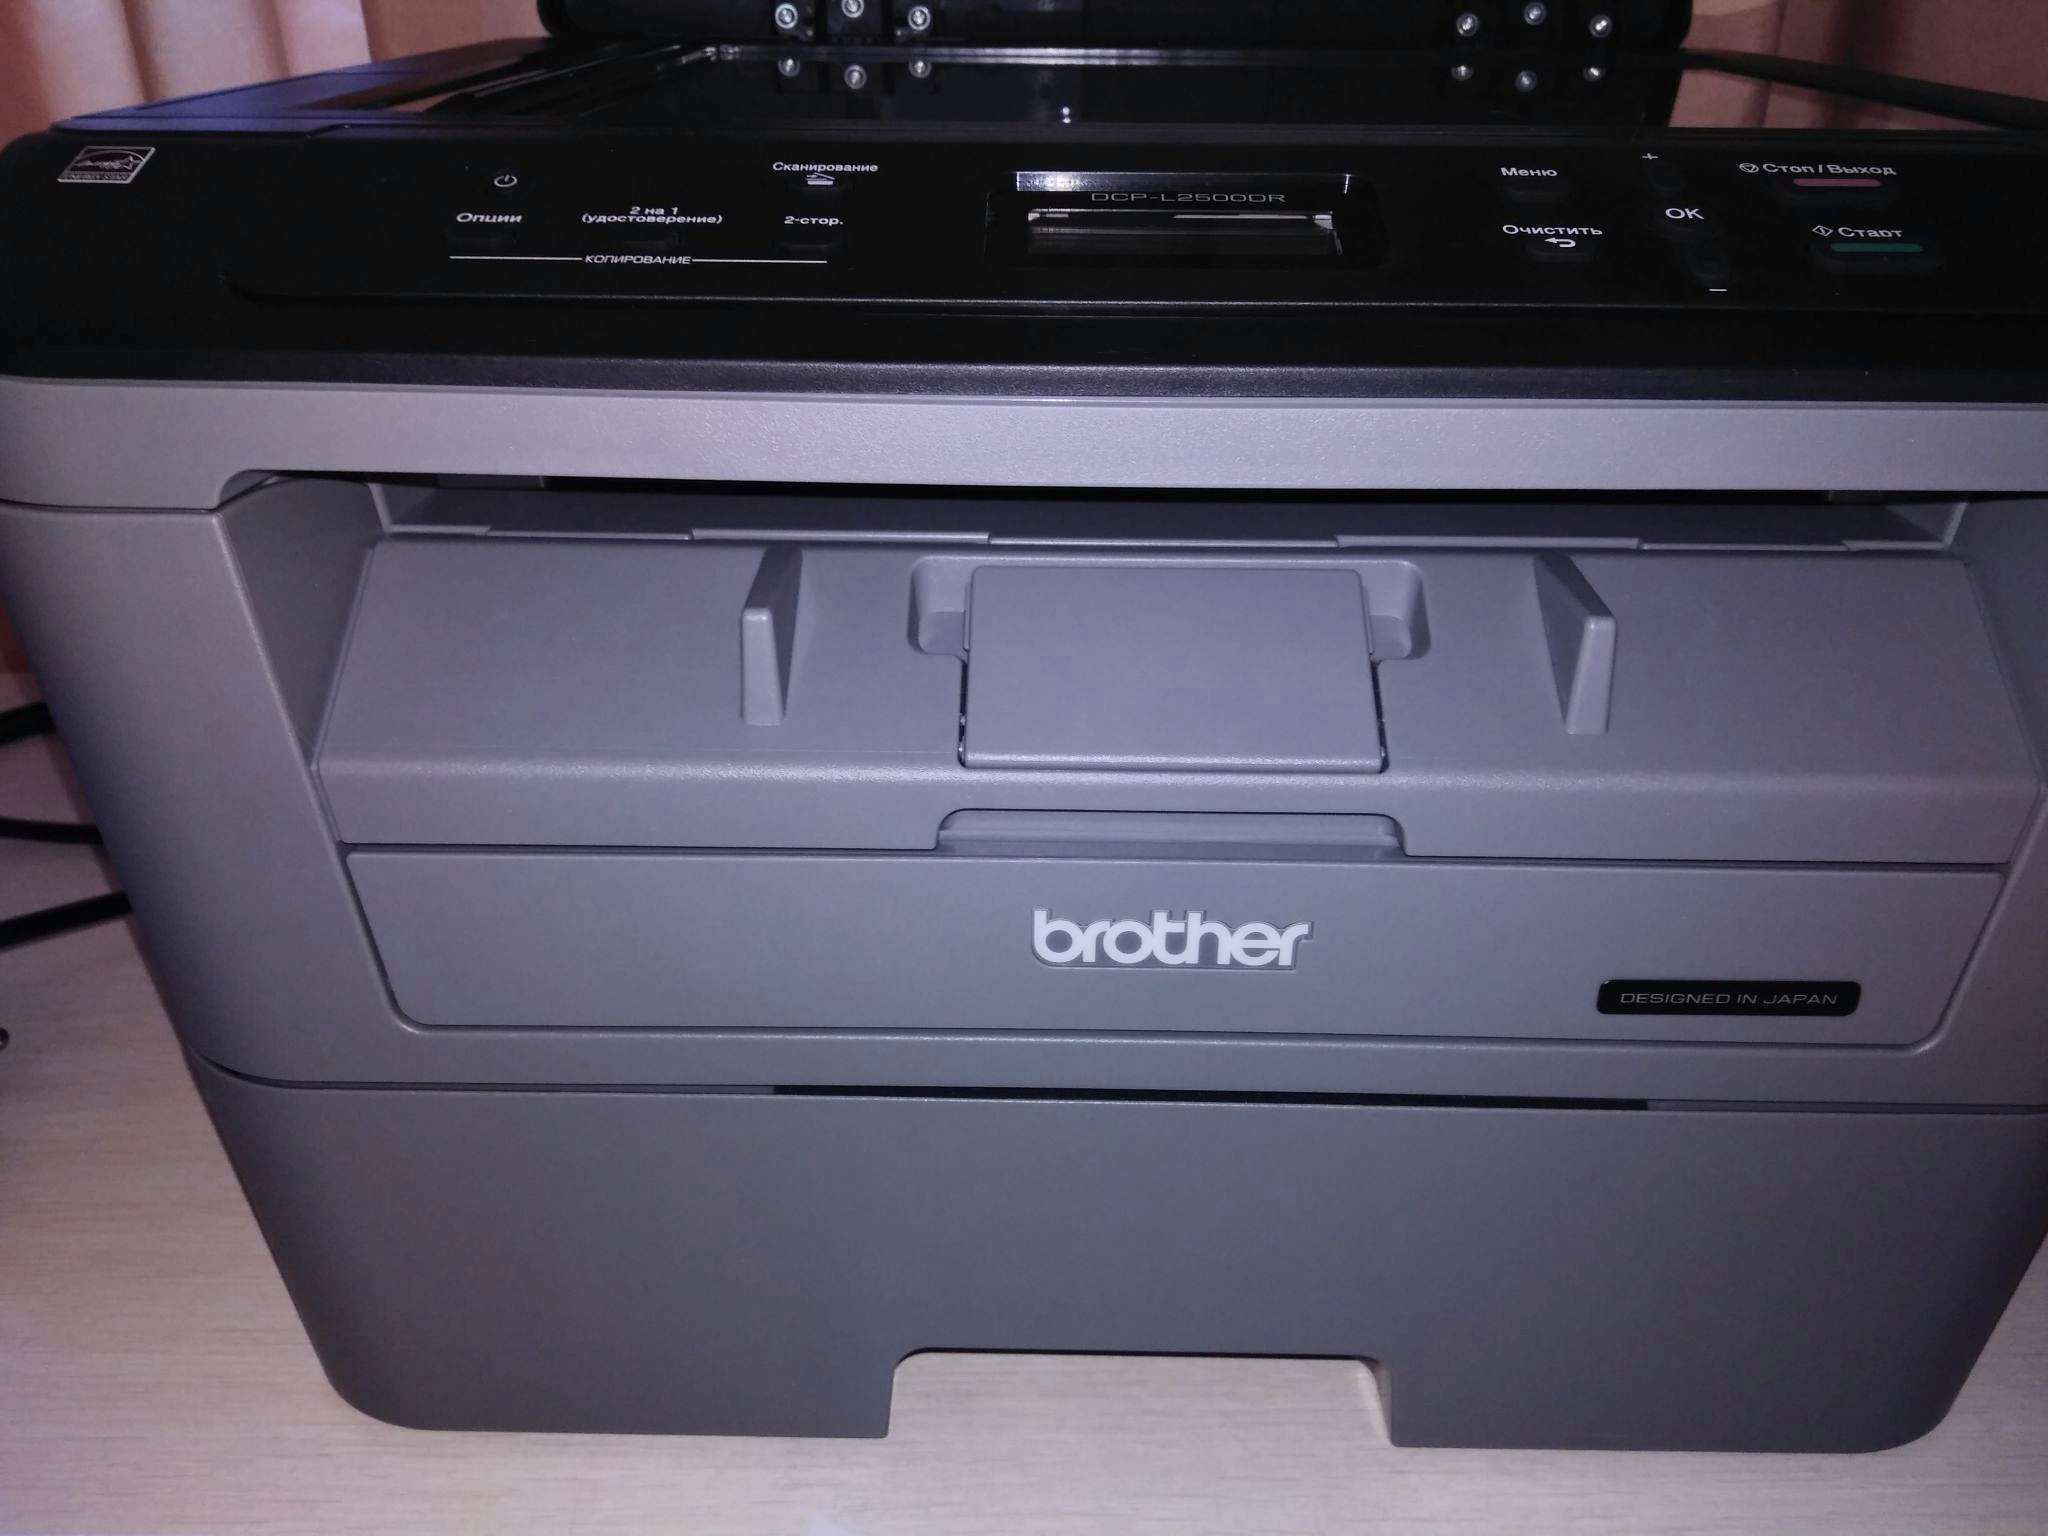 Brother dcp 2500dr. Принтер brother DCP l2500dr. МФУ brother DCP-l2500dr. Brother DCP 2500.